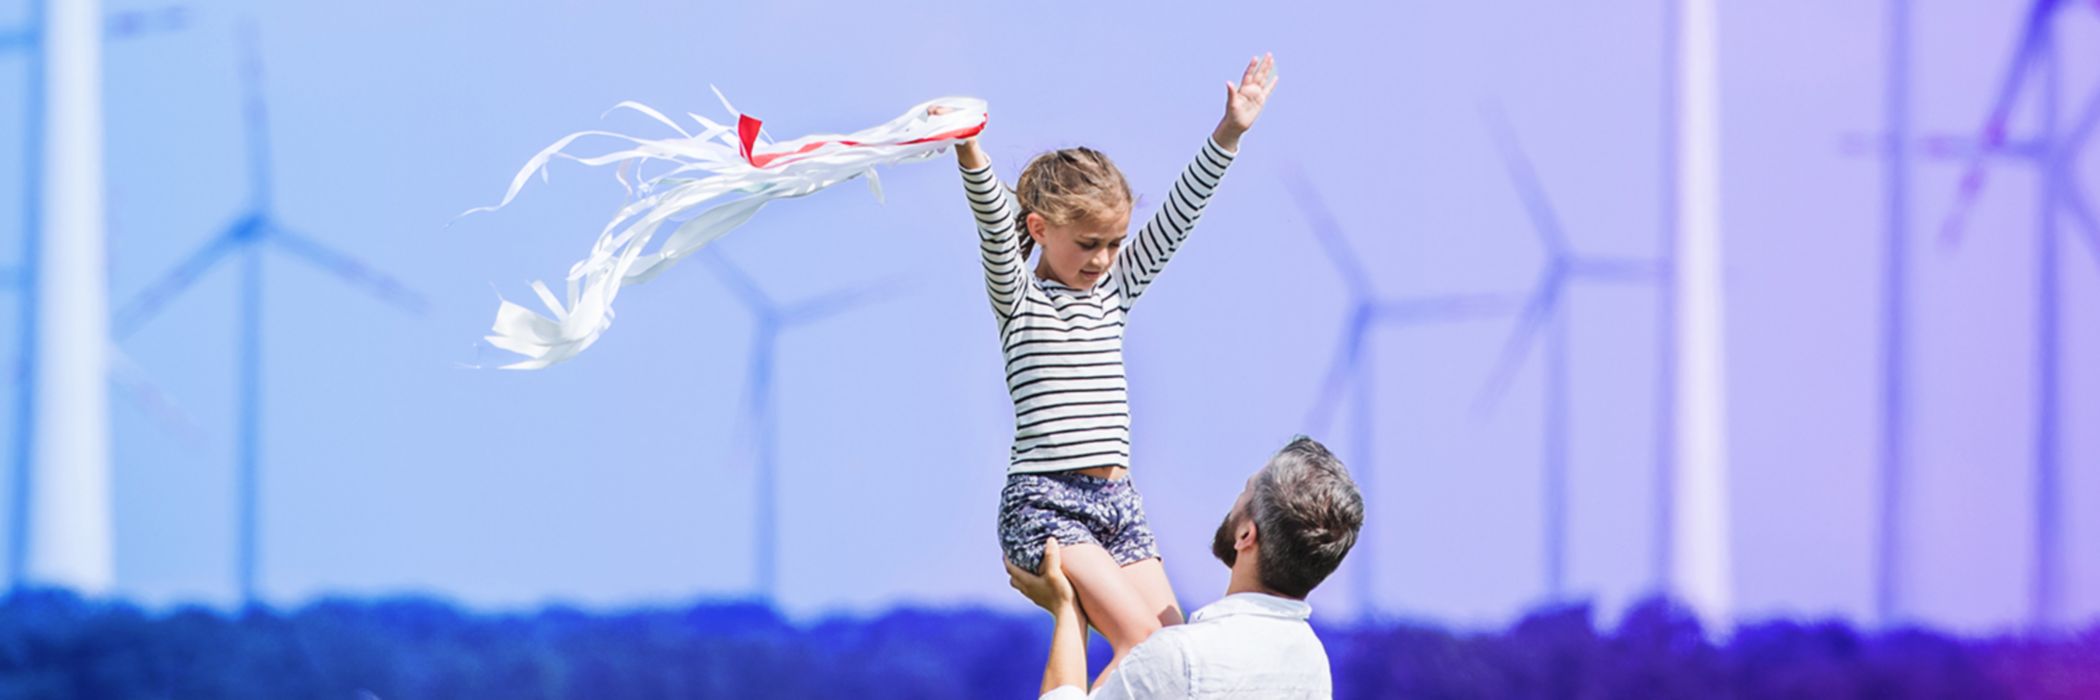 dad lifting daughter daughter in field in front of windturbines